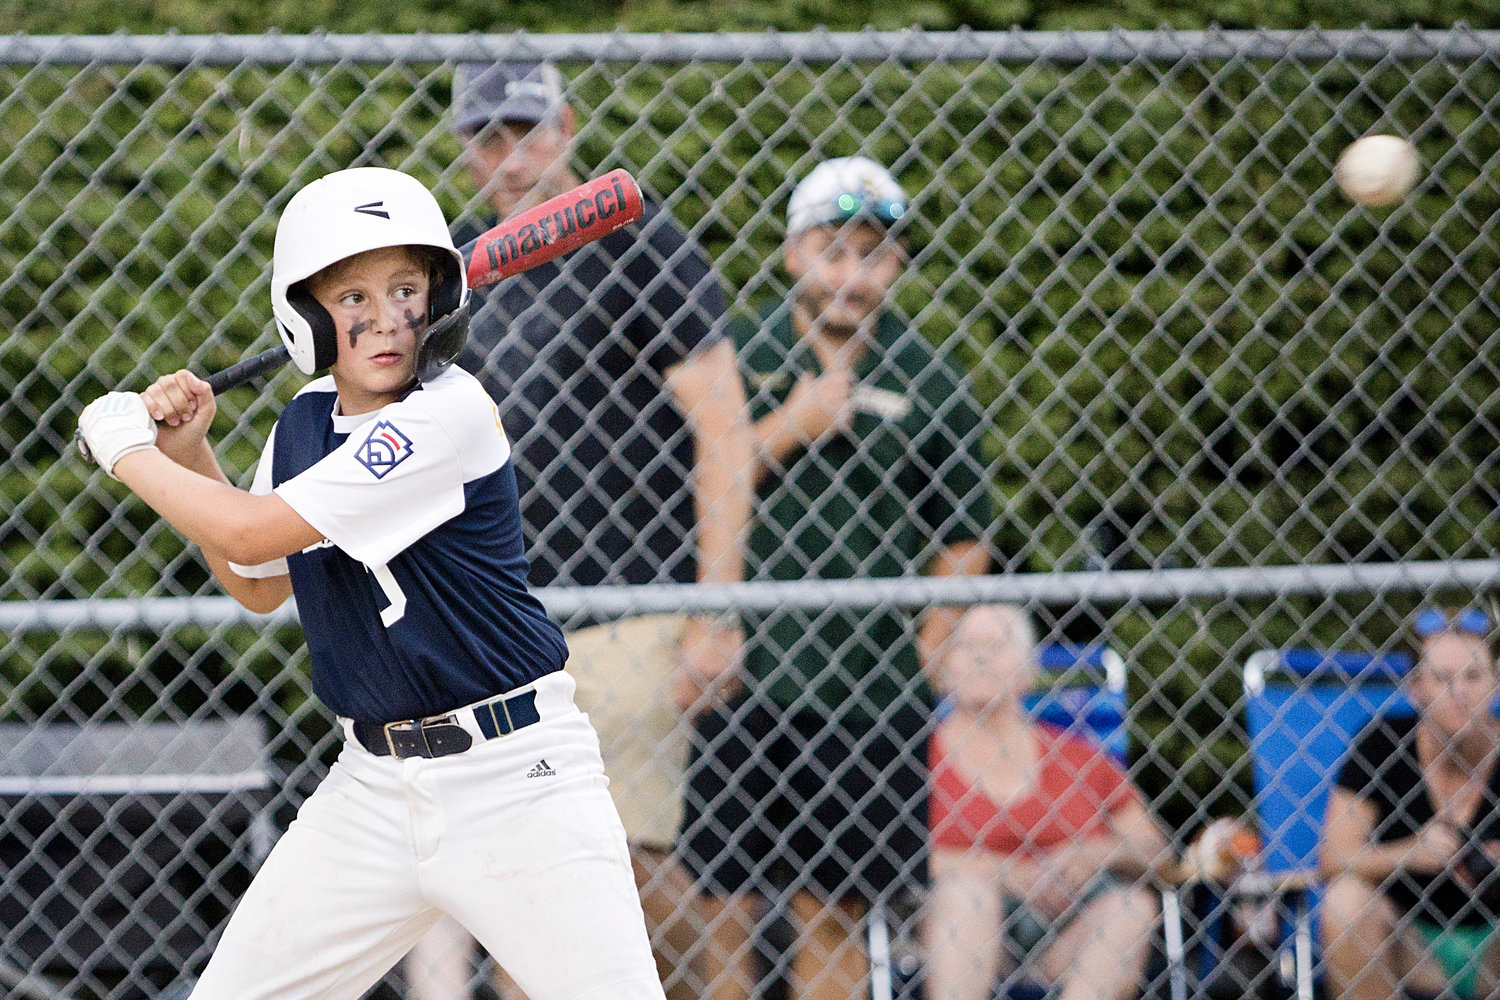 Ben Claussen times the ball while up to bat against Cranston East in the 11U All-Star State Tournament, Wednesday.